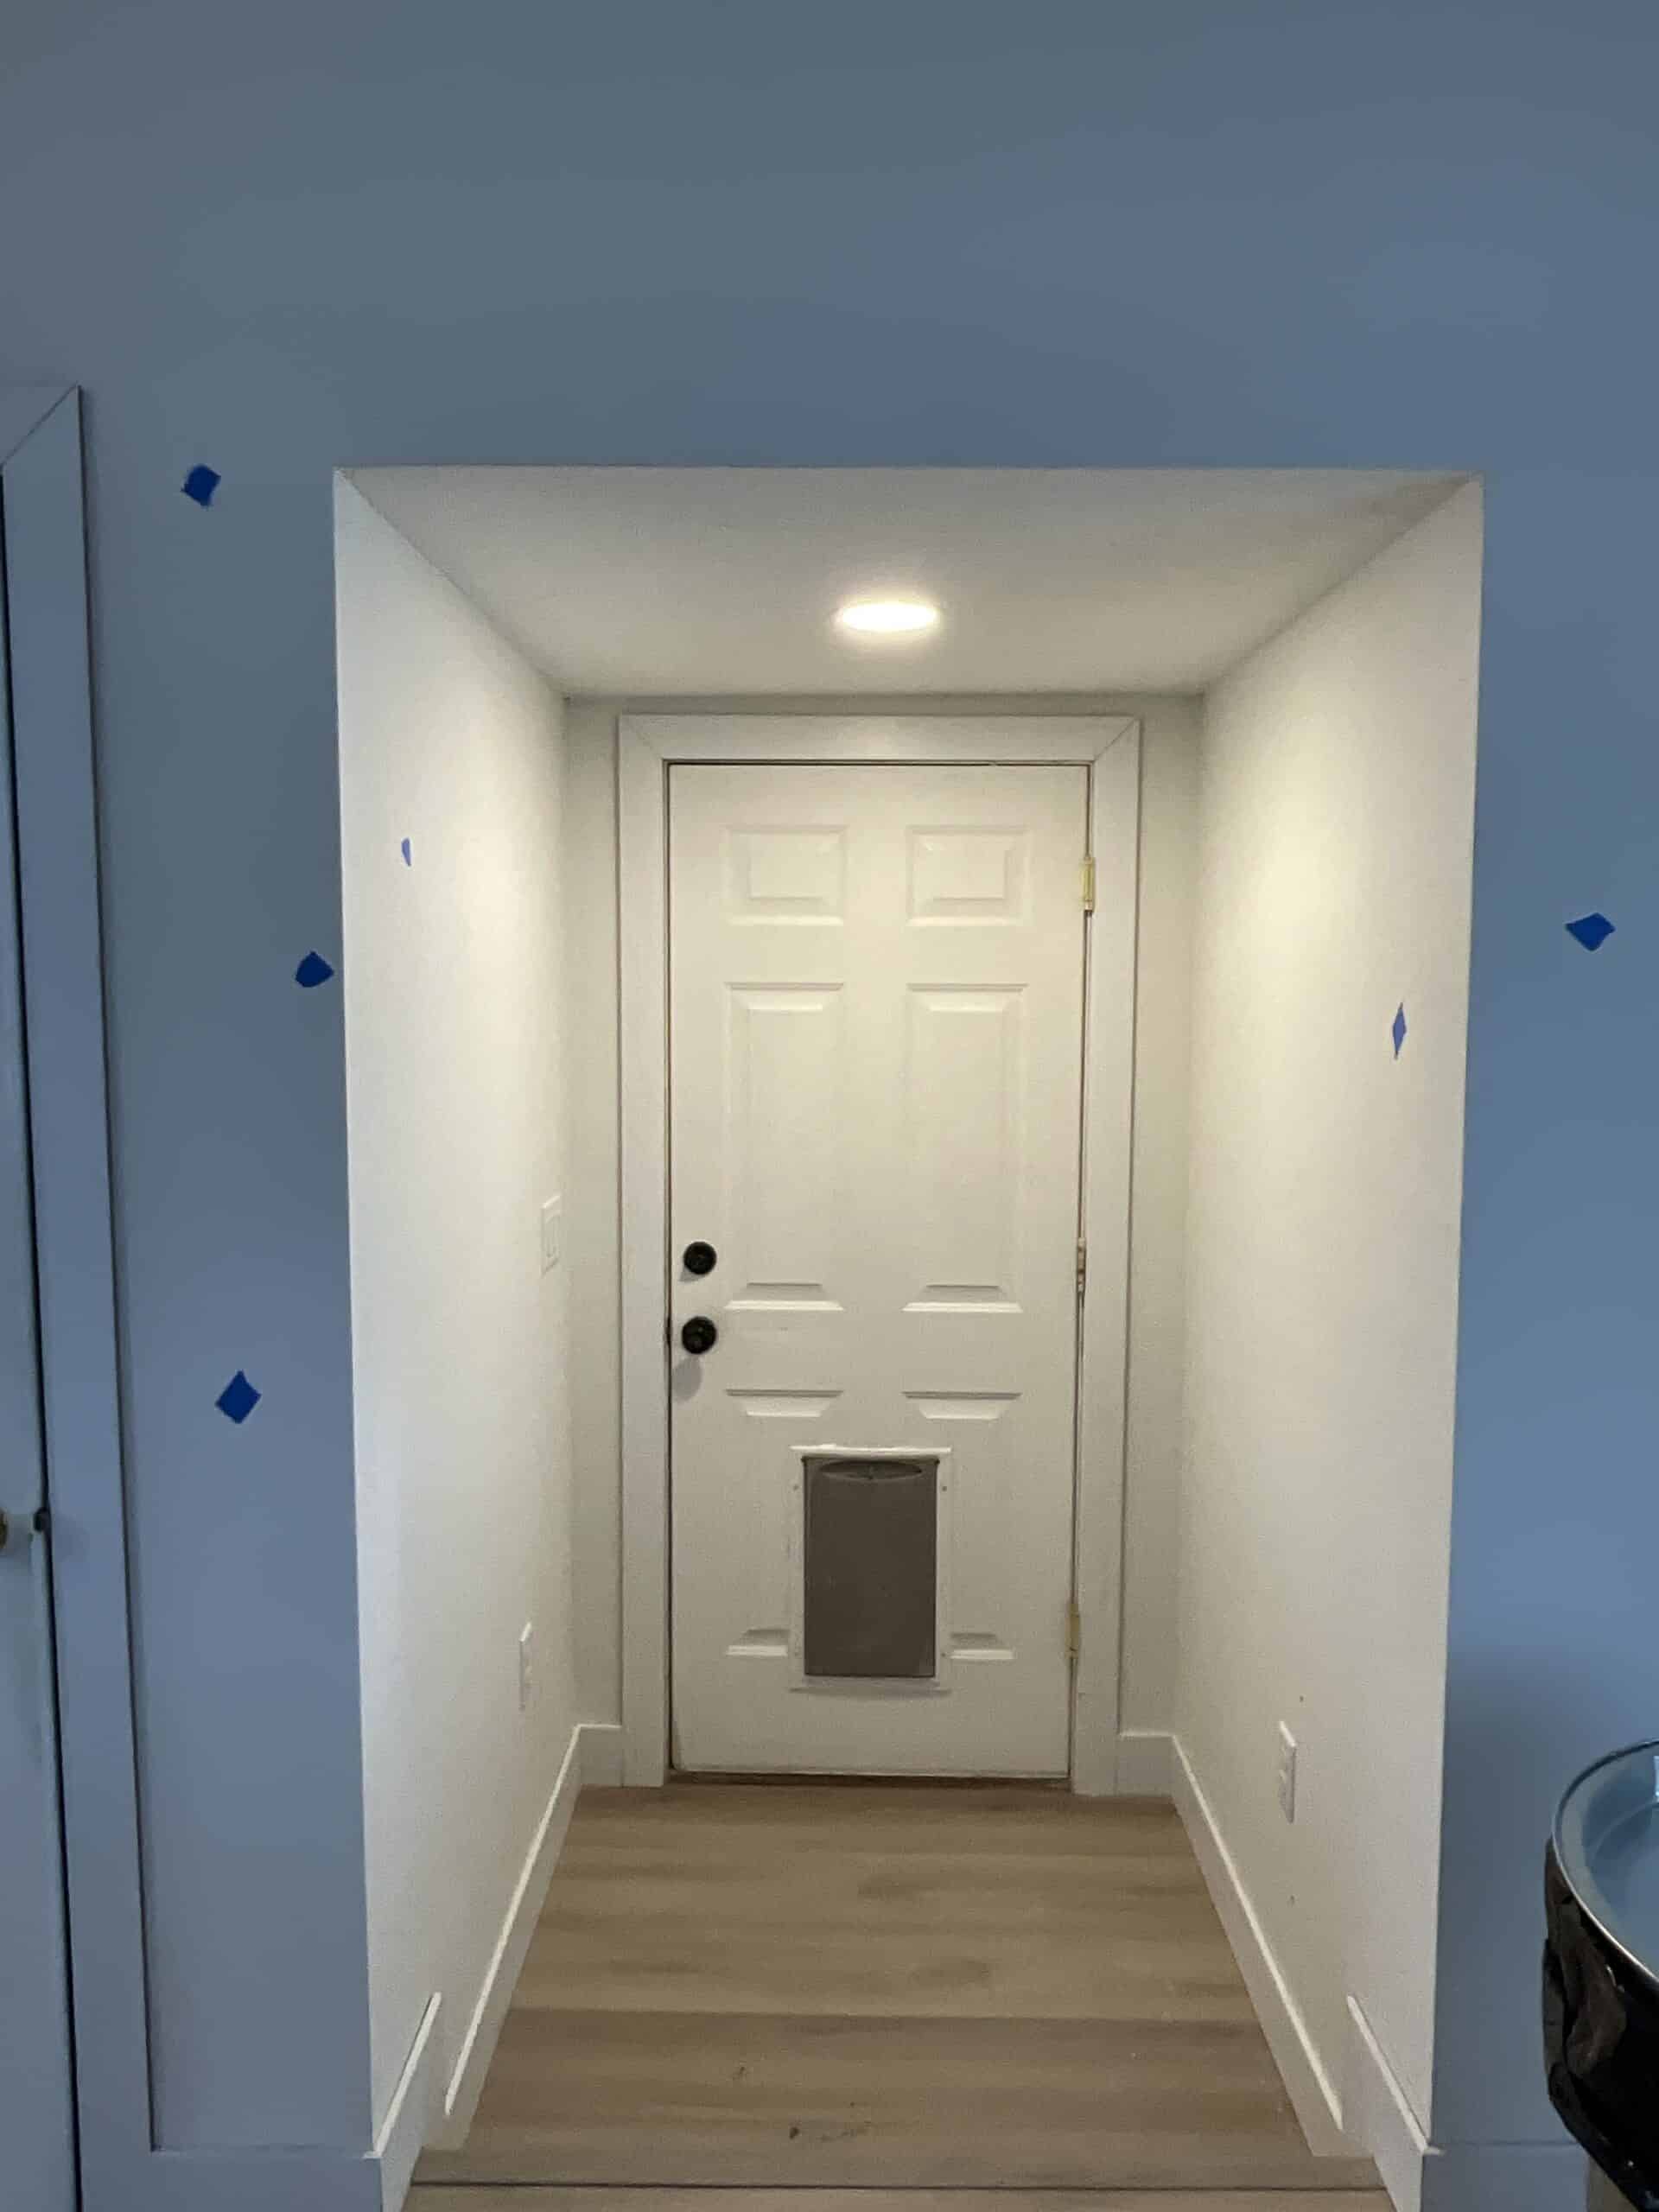 Finished entry way to this newly remodeled kitchen with a doggie door.. The homeowner went with white and blue accent for the paint.